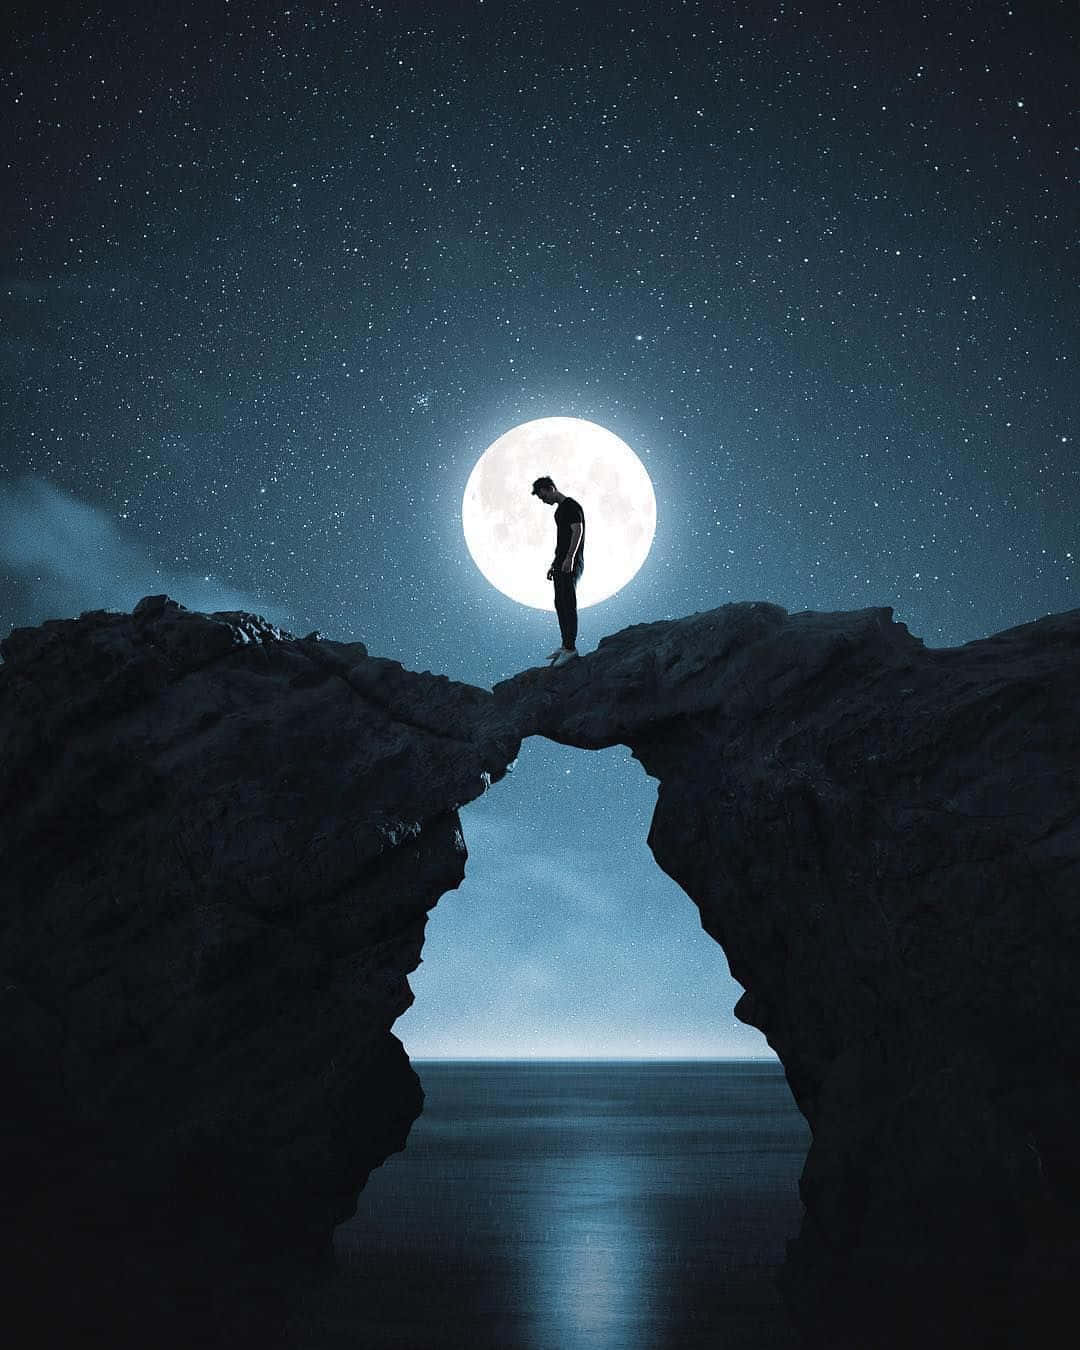 A Man Standing On A Rock In The Night Sky